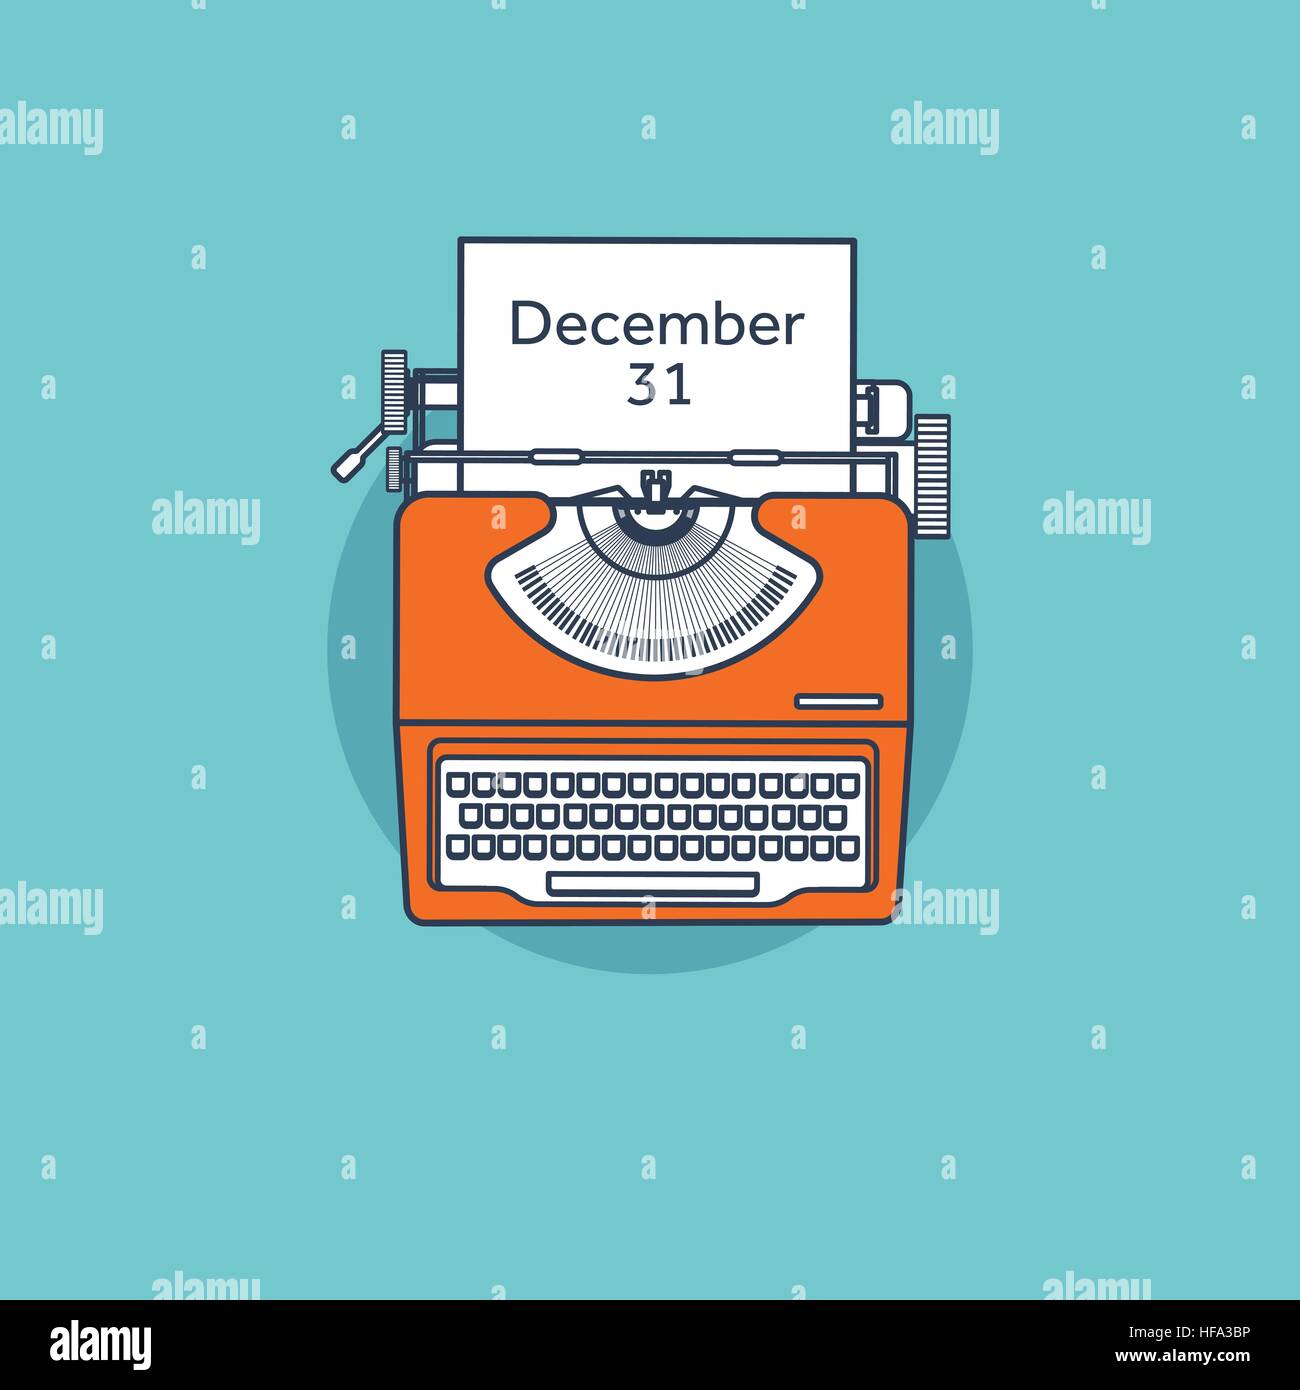 Typewriter in a flat style. Christmas wish list. Letter to Santa. New year. 2017. December 31 holidays. Stock Vector